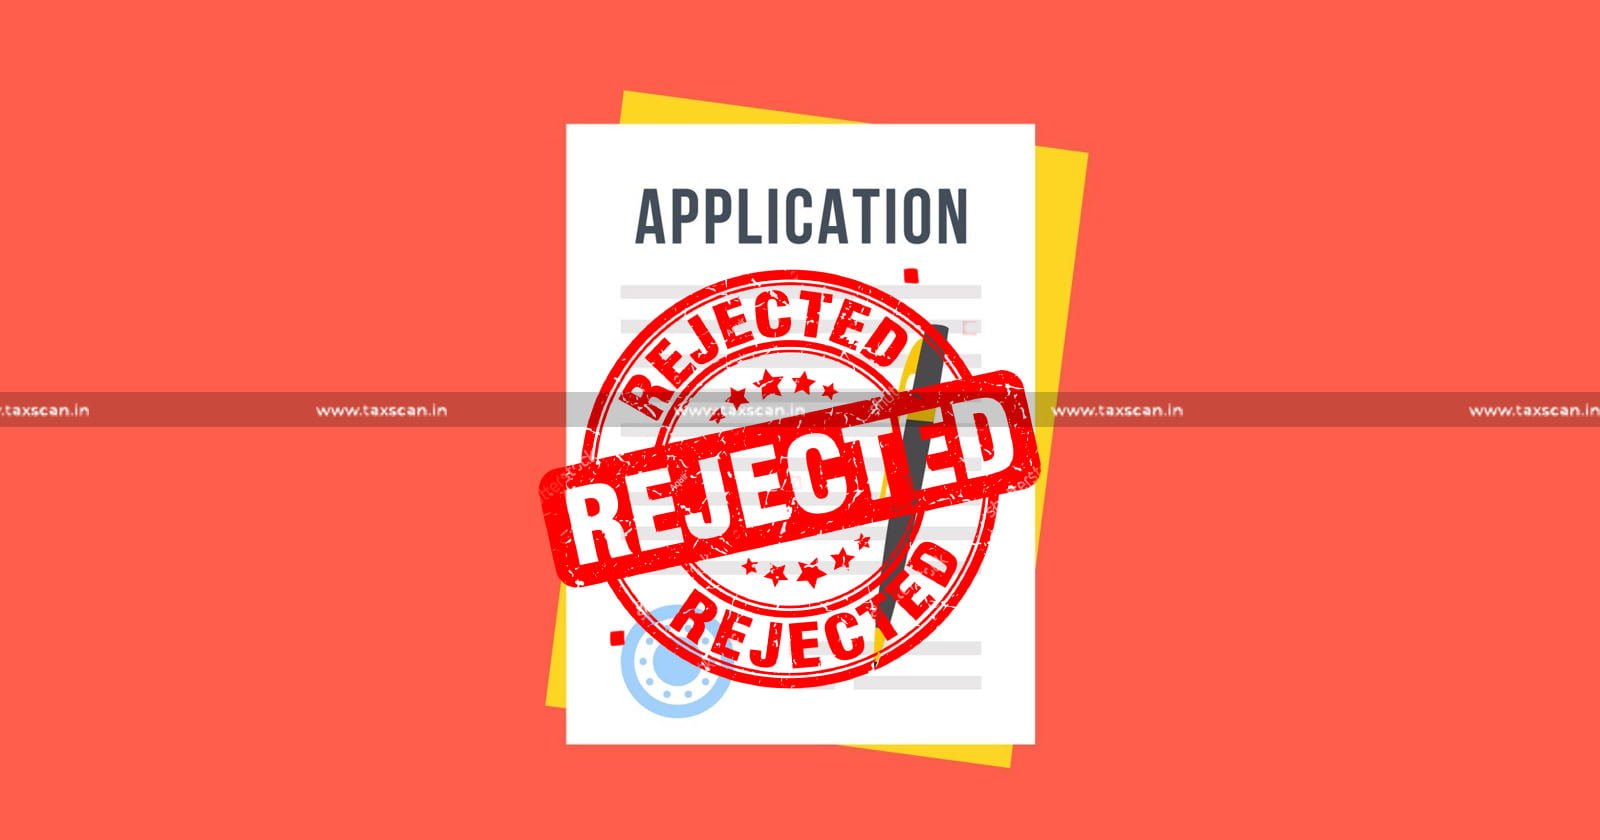 Rejection - Application - Registration - Income – Tax - Act - Granting - Proper - Opportunity – Assessee - ITAT - Re-adjudication – TAXSCAN